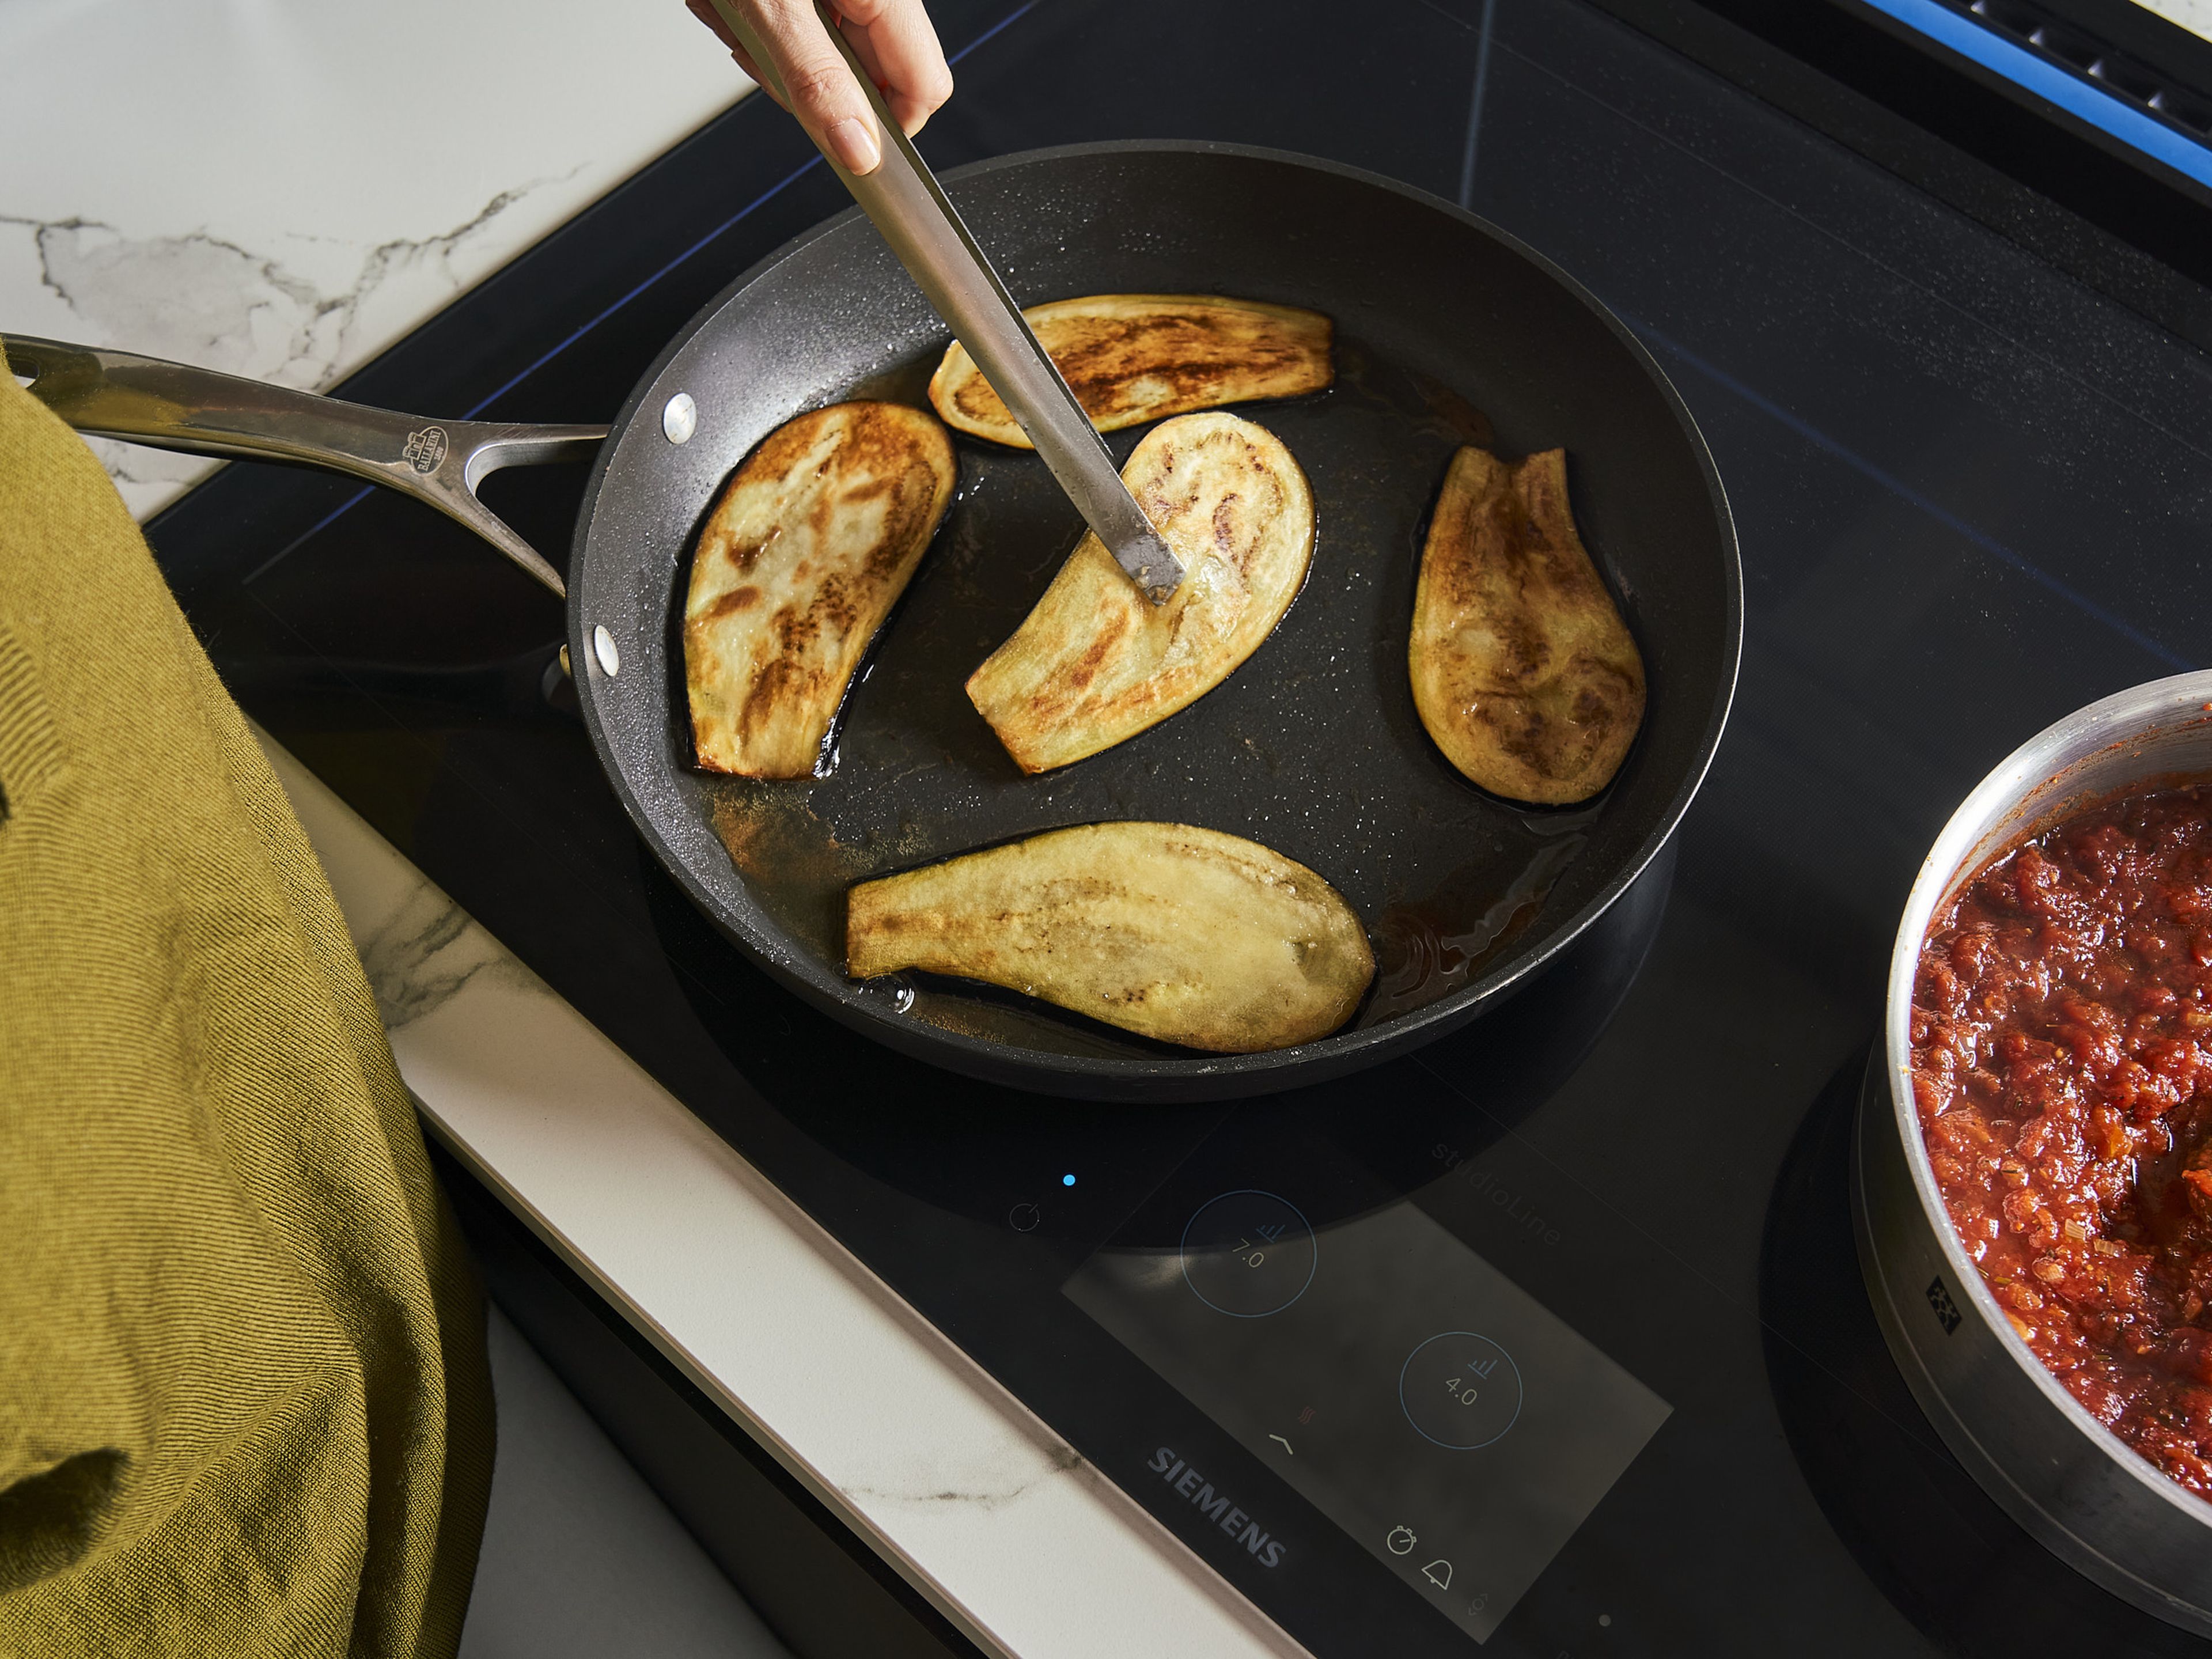 Meanwhile, add a generous amount of olive oil to a frying pan and heat over medium heat. Pat the aubergine slices dry, then dredge in flour, shake off any excess and fry for approx. 2–3 min. per side until golden brown. Leave to drain on paper towels and set aside.